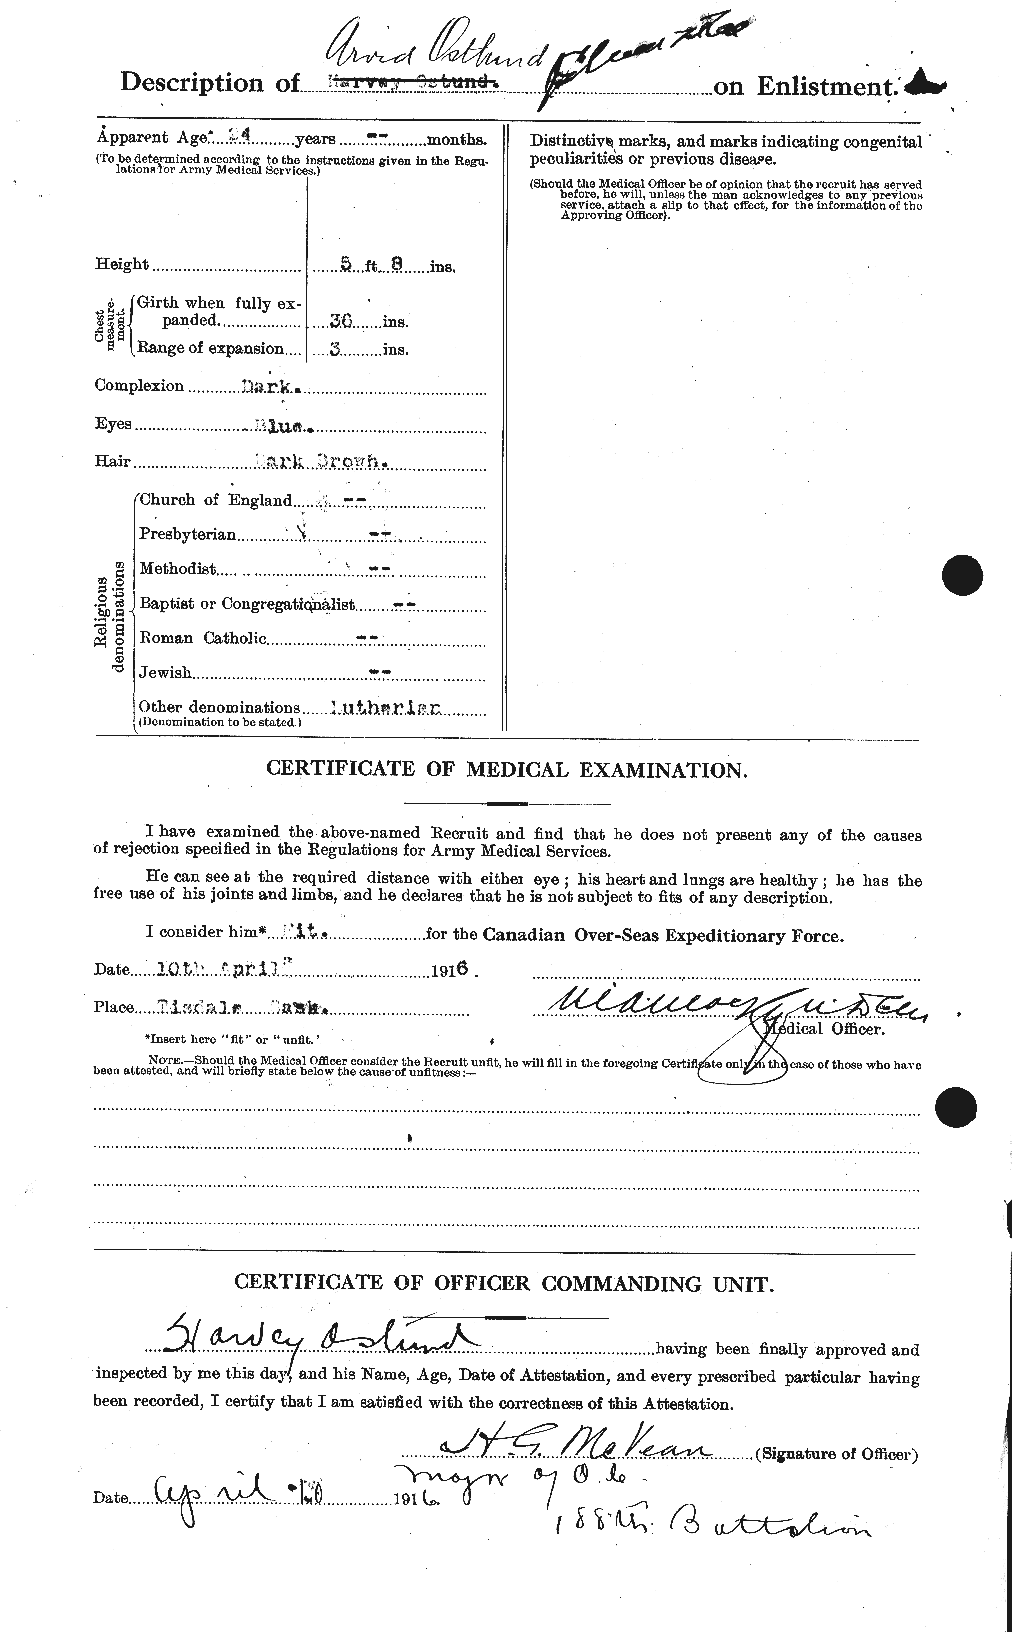 Personnel Records of the First World War - CEF 560235b